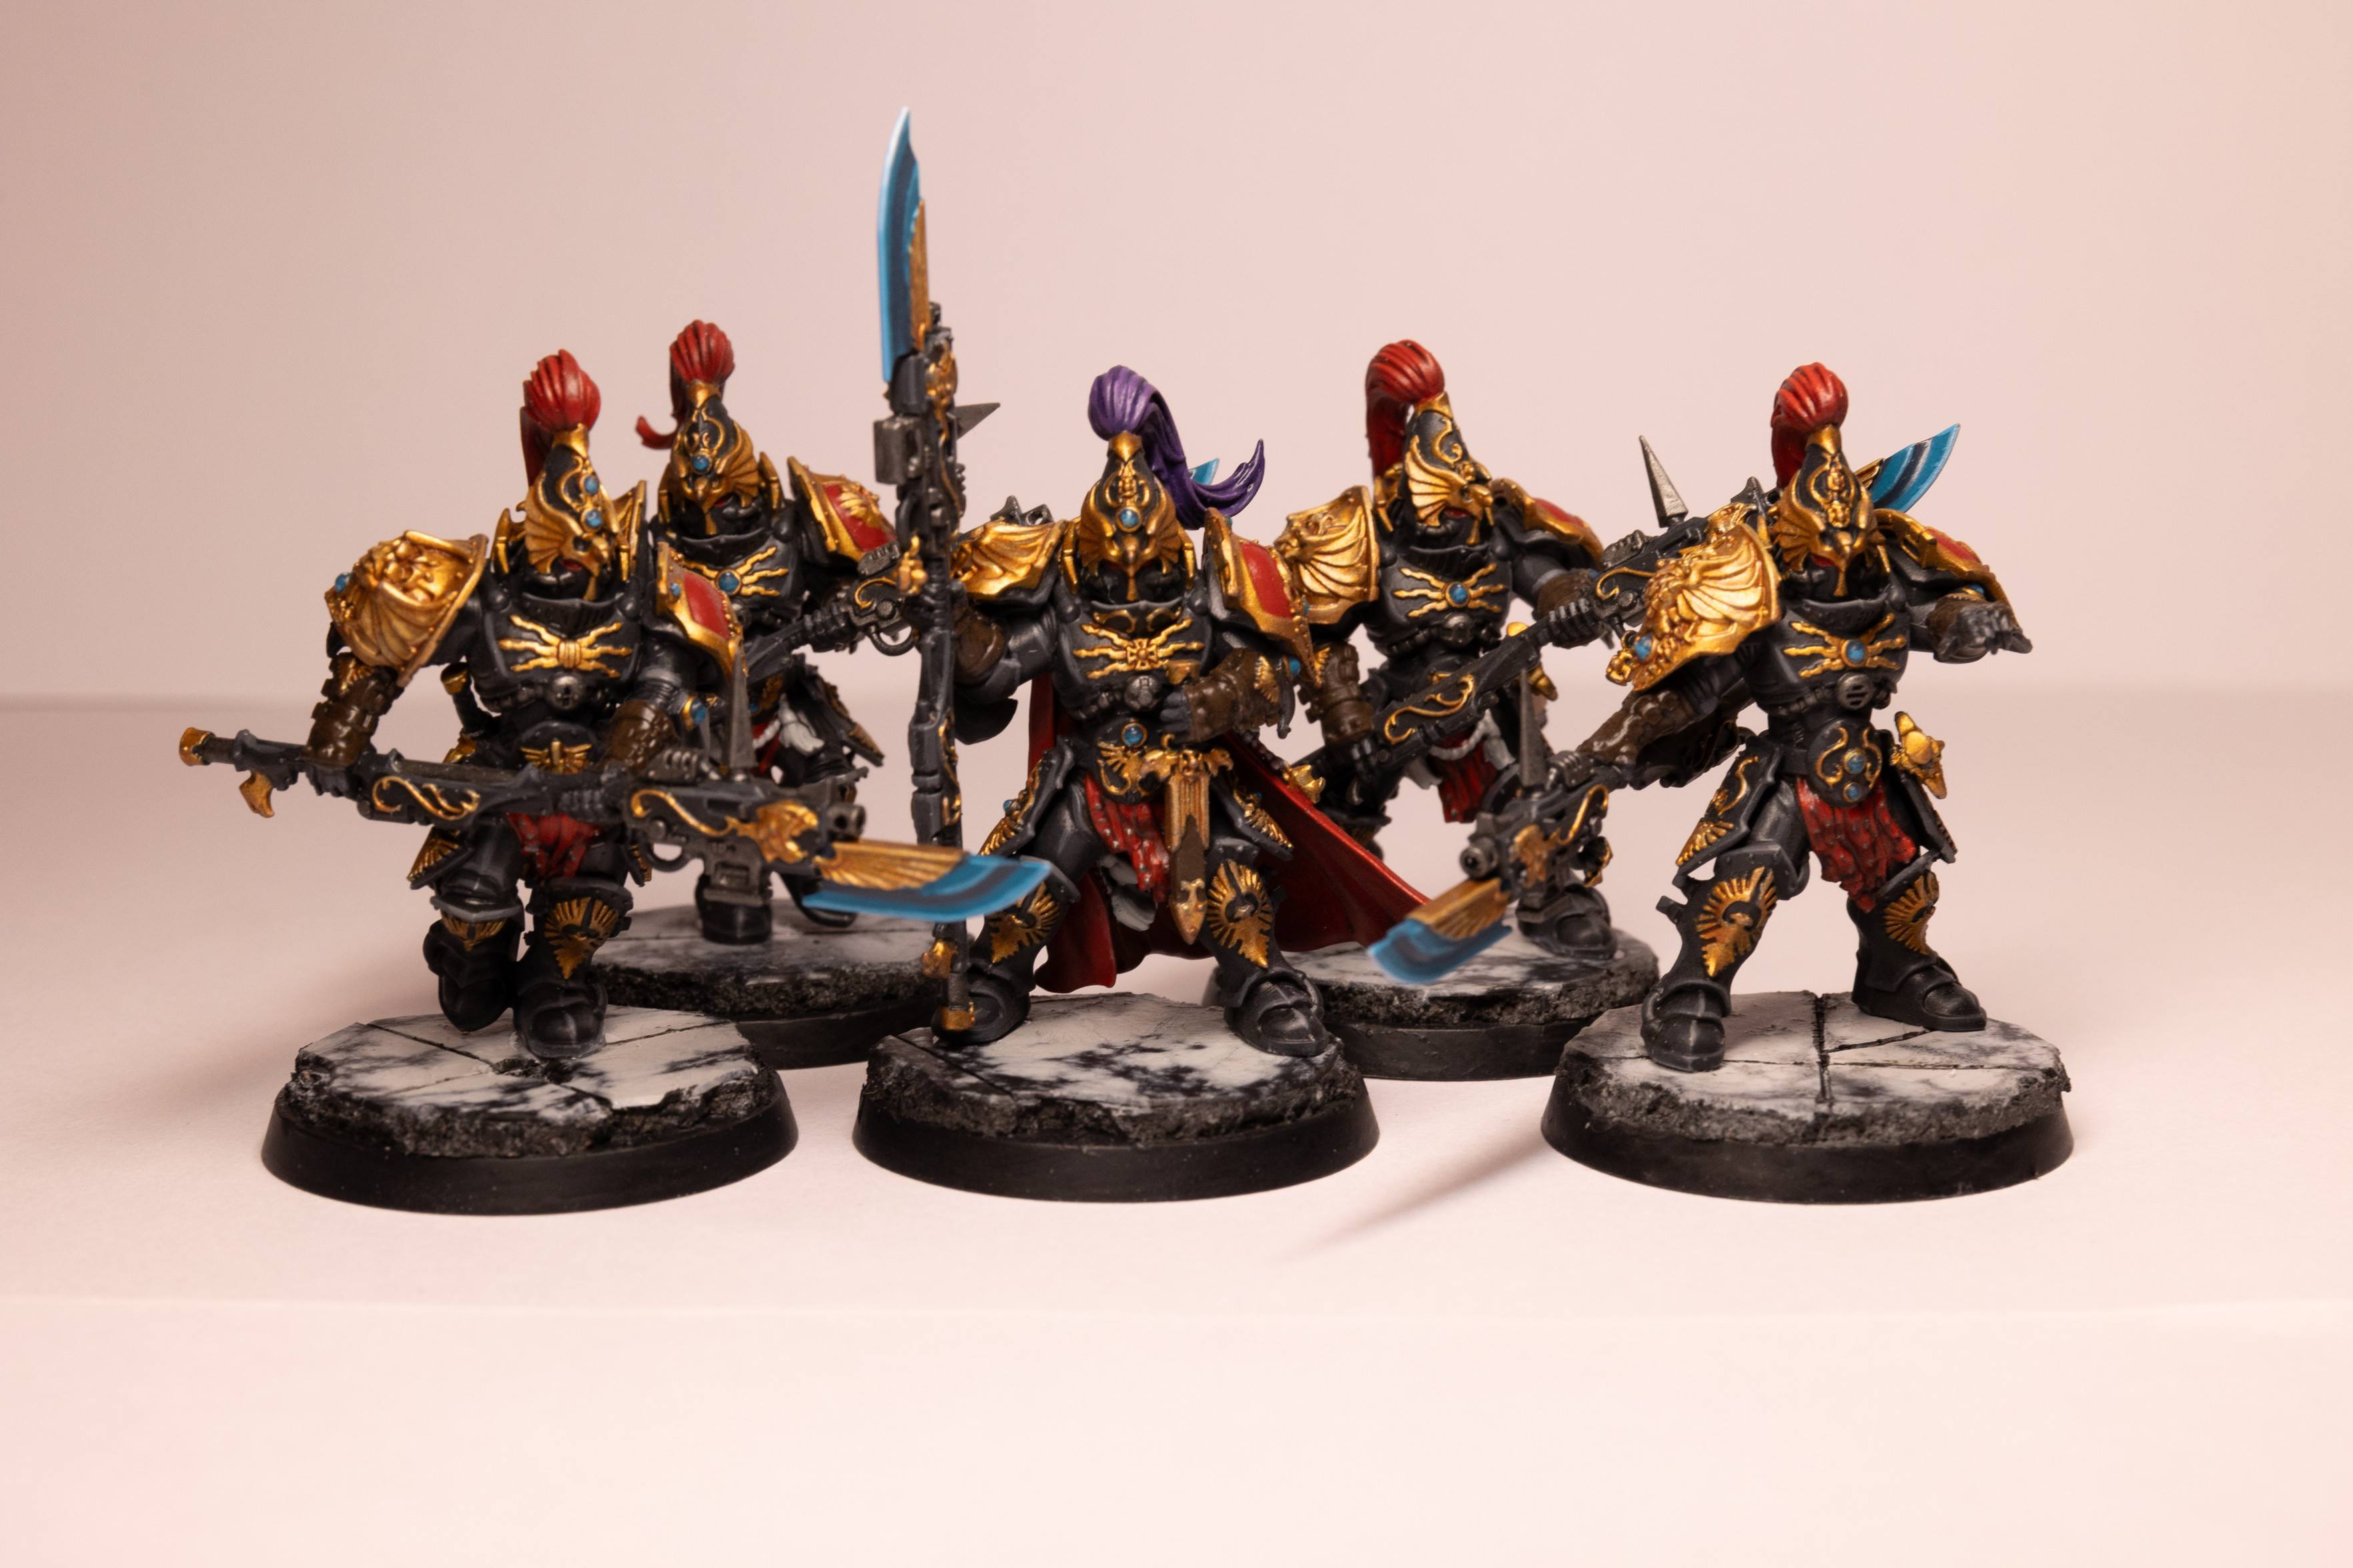 Five Warhammer 40k Custodian Guard in the Shadowkeepers color scheme. They are five tall armoured people in black armour with gold trim and red accents. They have tall helmets with plumes of hair, they are all red except the Captain in the middle who has a purple plume. They are all carrying spear weapons whose tips are an electric blue. They are all stood on white and black marble-like bases.